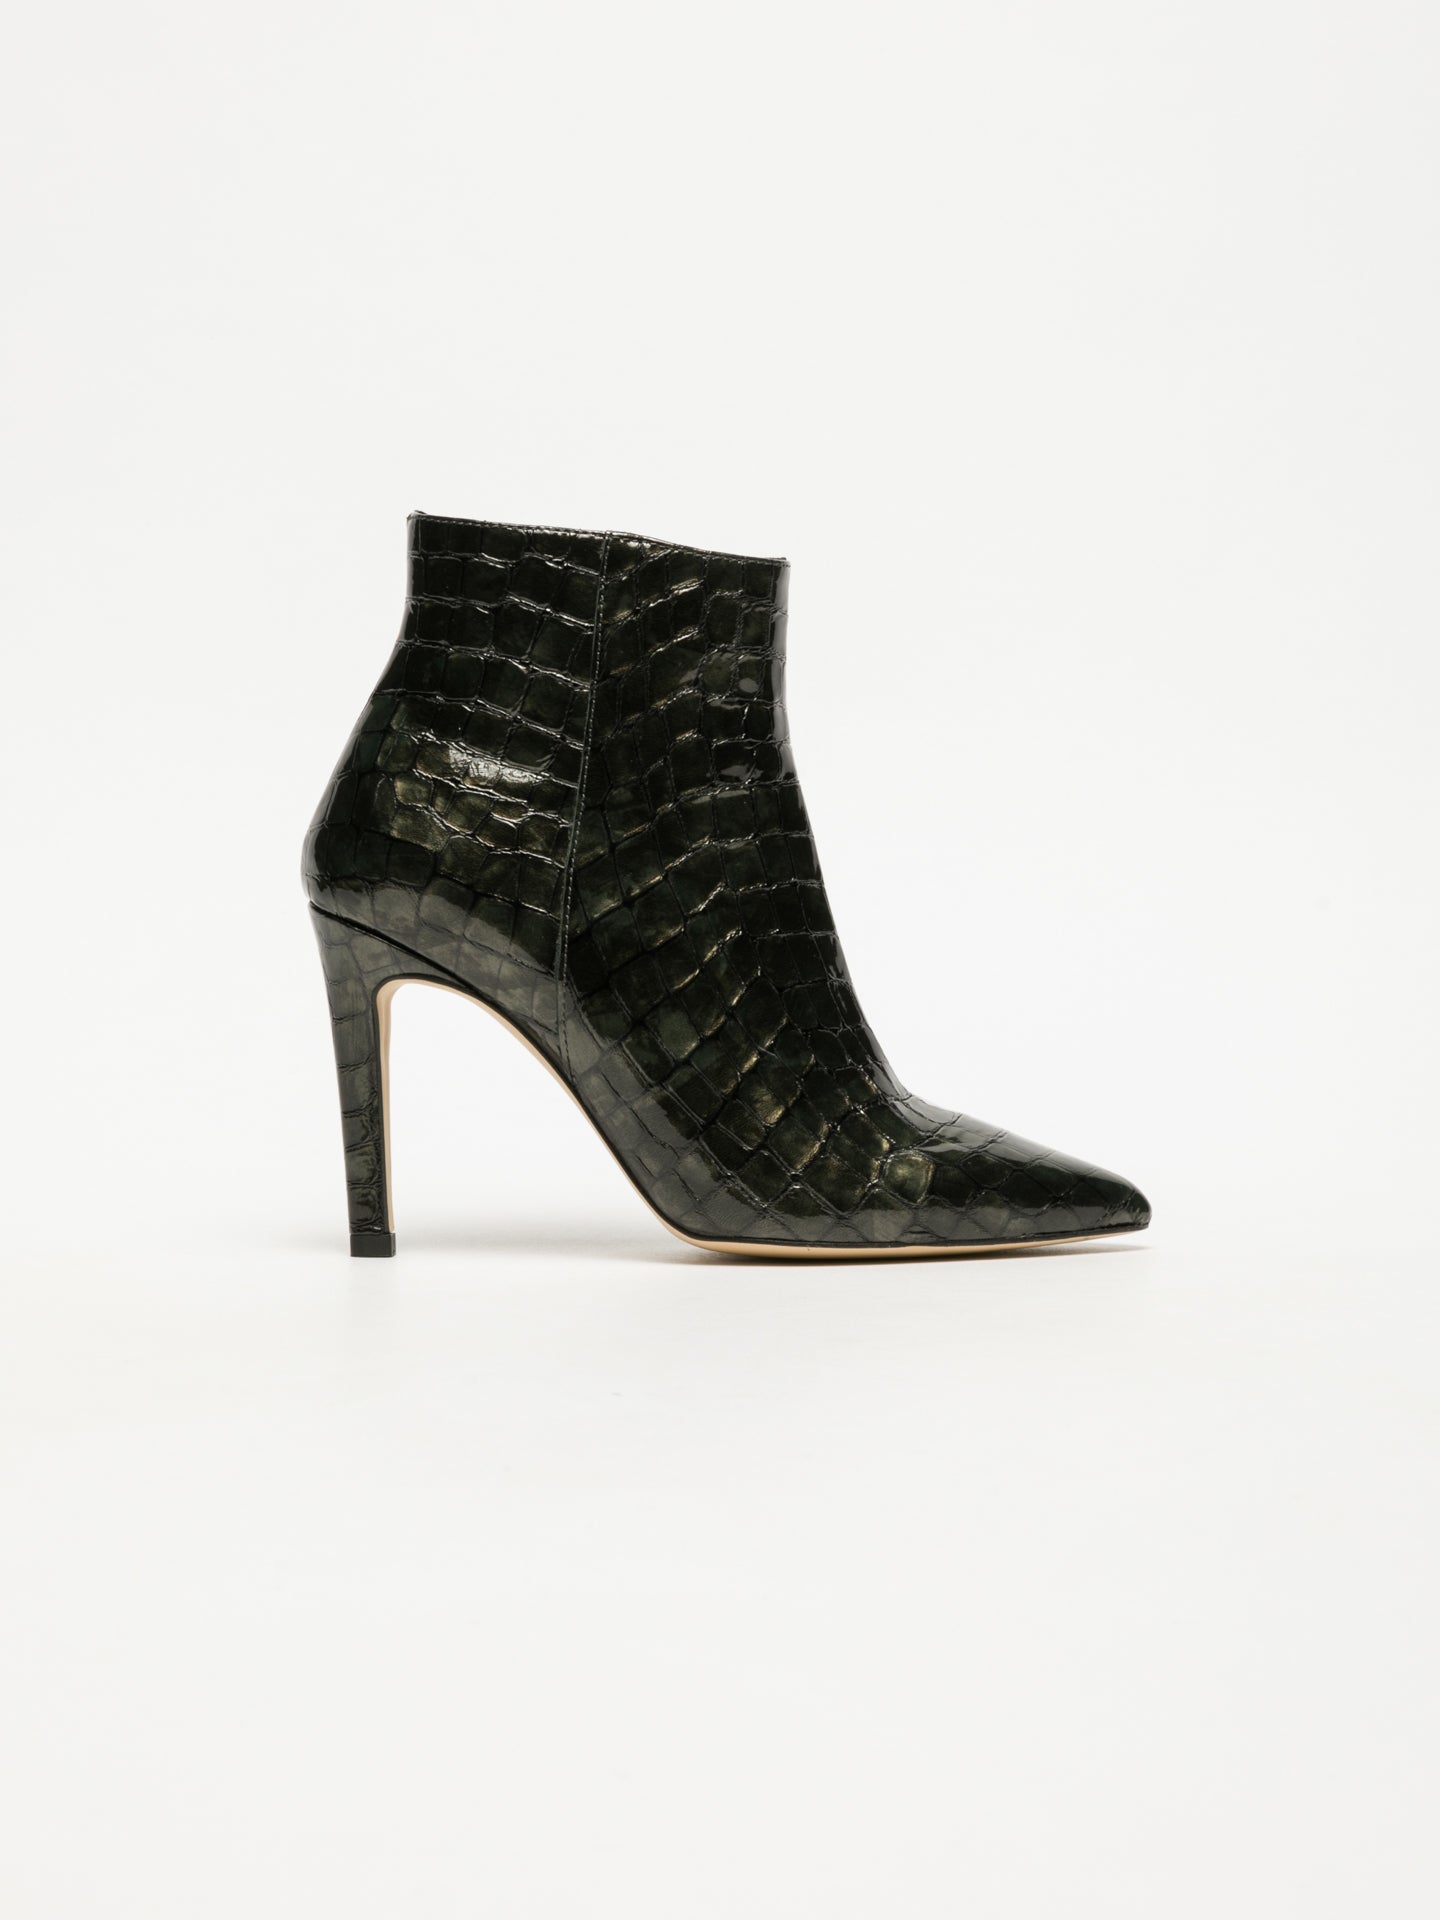 Sofia Costa DarkGreen Pointed Toe Ankle Boots